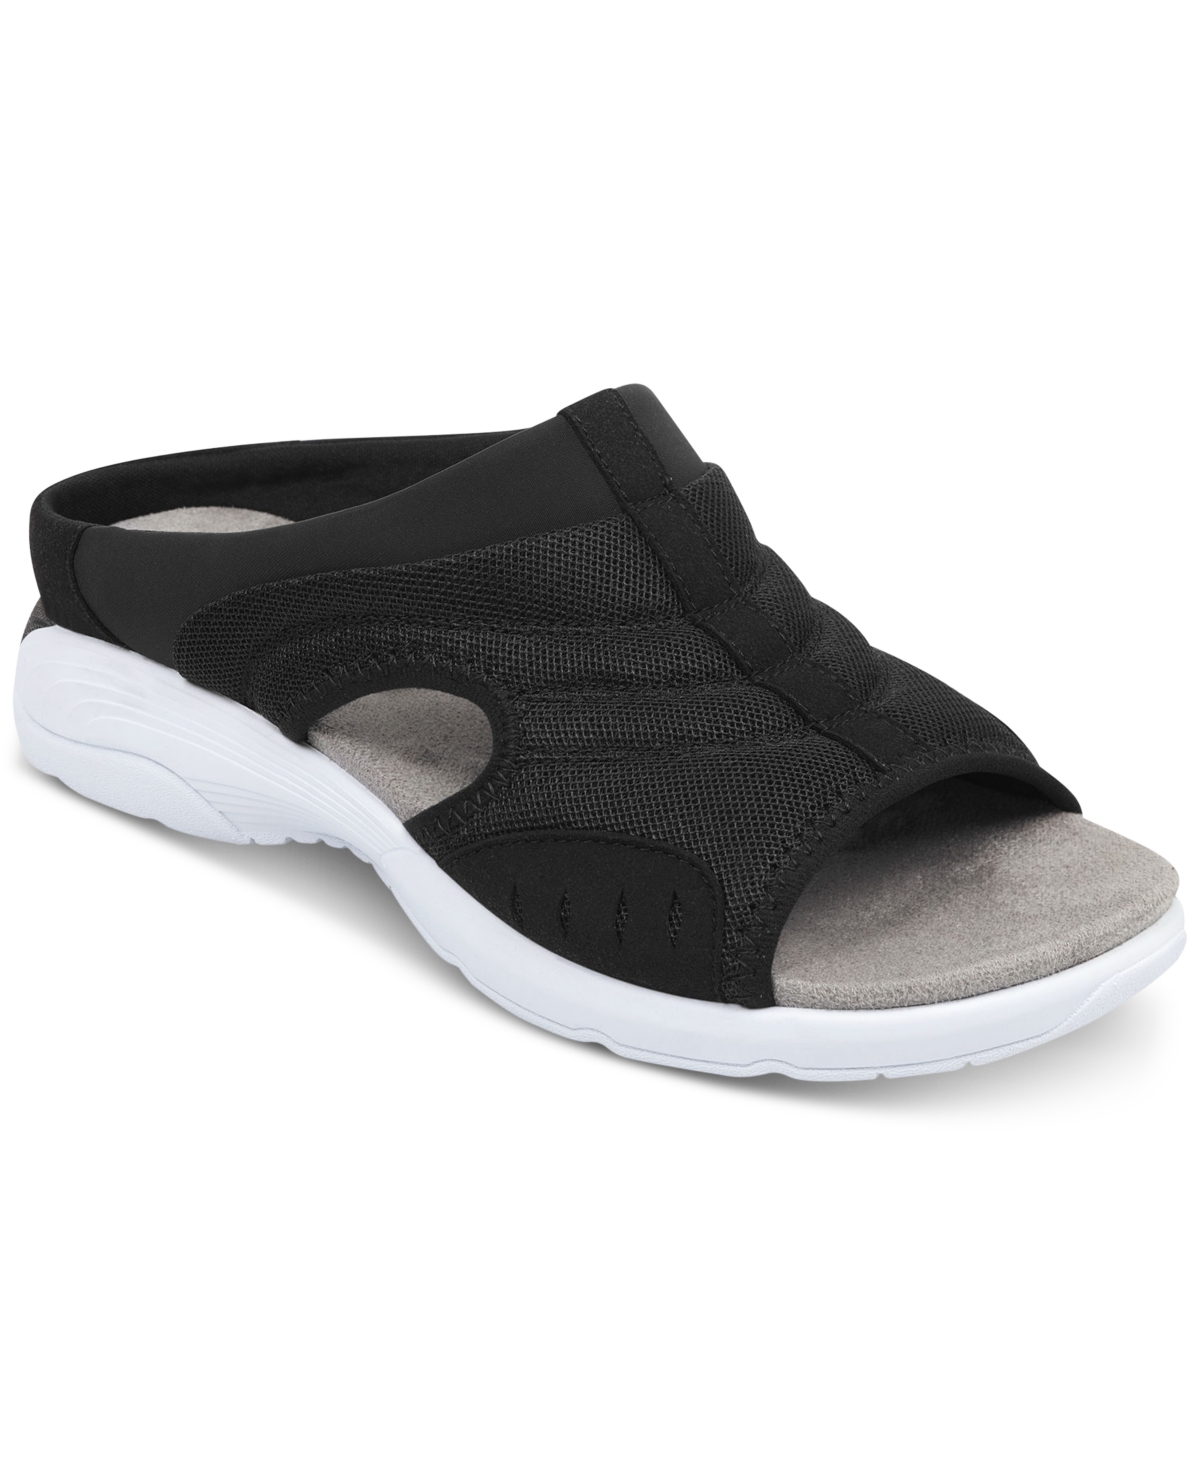 UPC 192733305108 product image for Easy Spirit Women's Traciee Square Toe Casual Flat Sandals Women's Shoes | upcitemdb.com